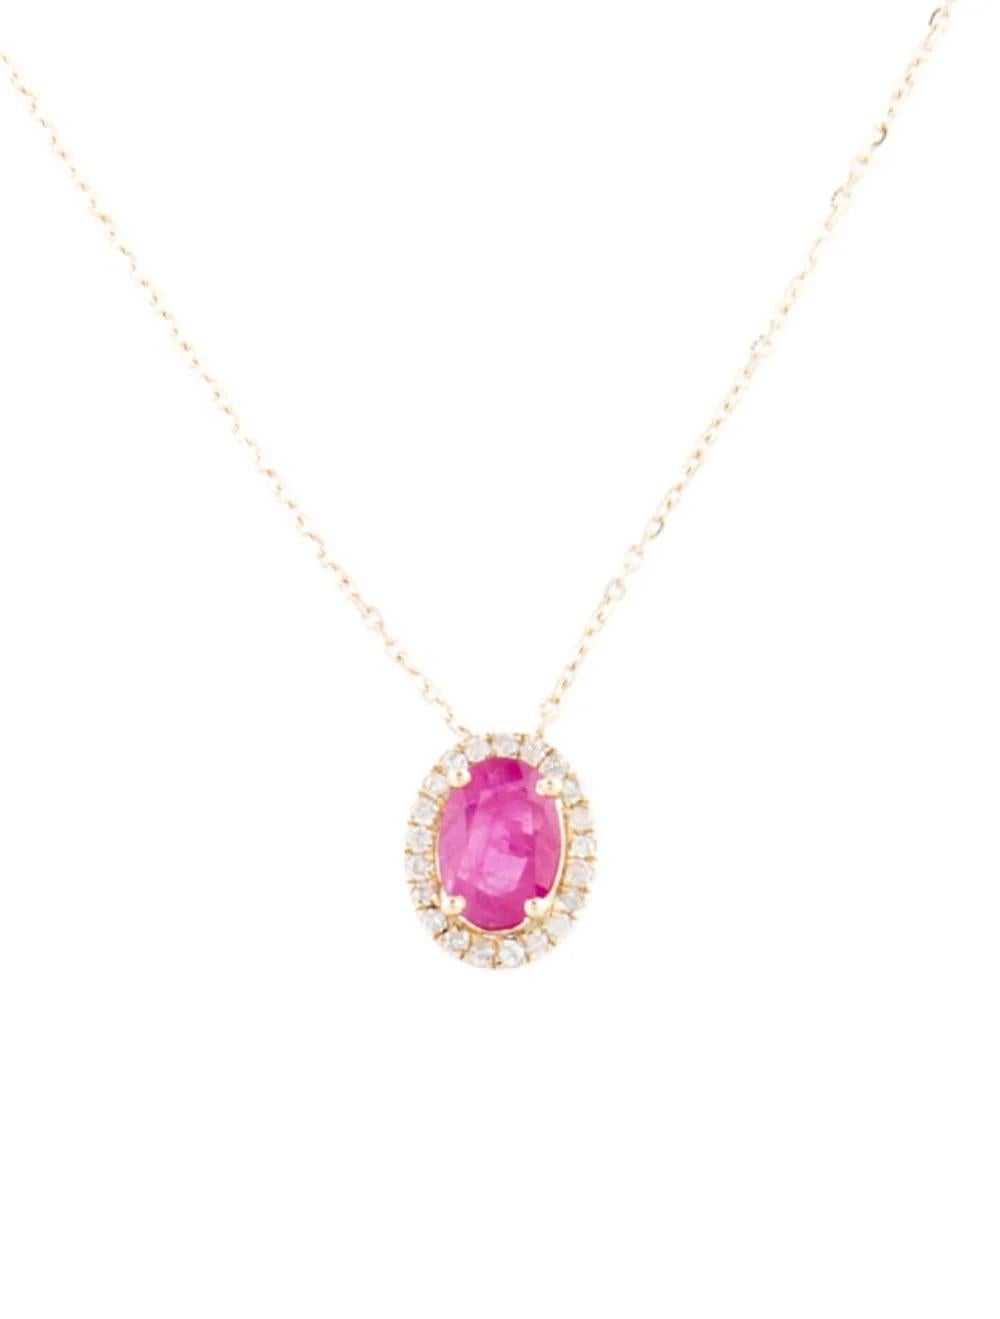 Introducing our exquisite 14K Yellow Gold Necklace, adorned with a captivating 0.95 Carat Oval Modified Brilliant Ruby at its center, encircled by a halo of shimmering Diamonds. Crafted to perfection, this timeless piece exudes elegance and